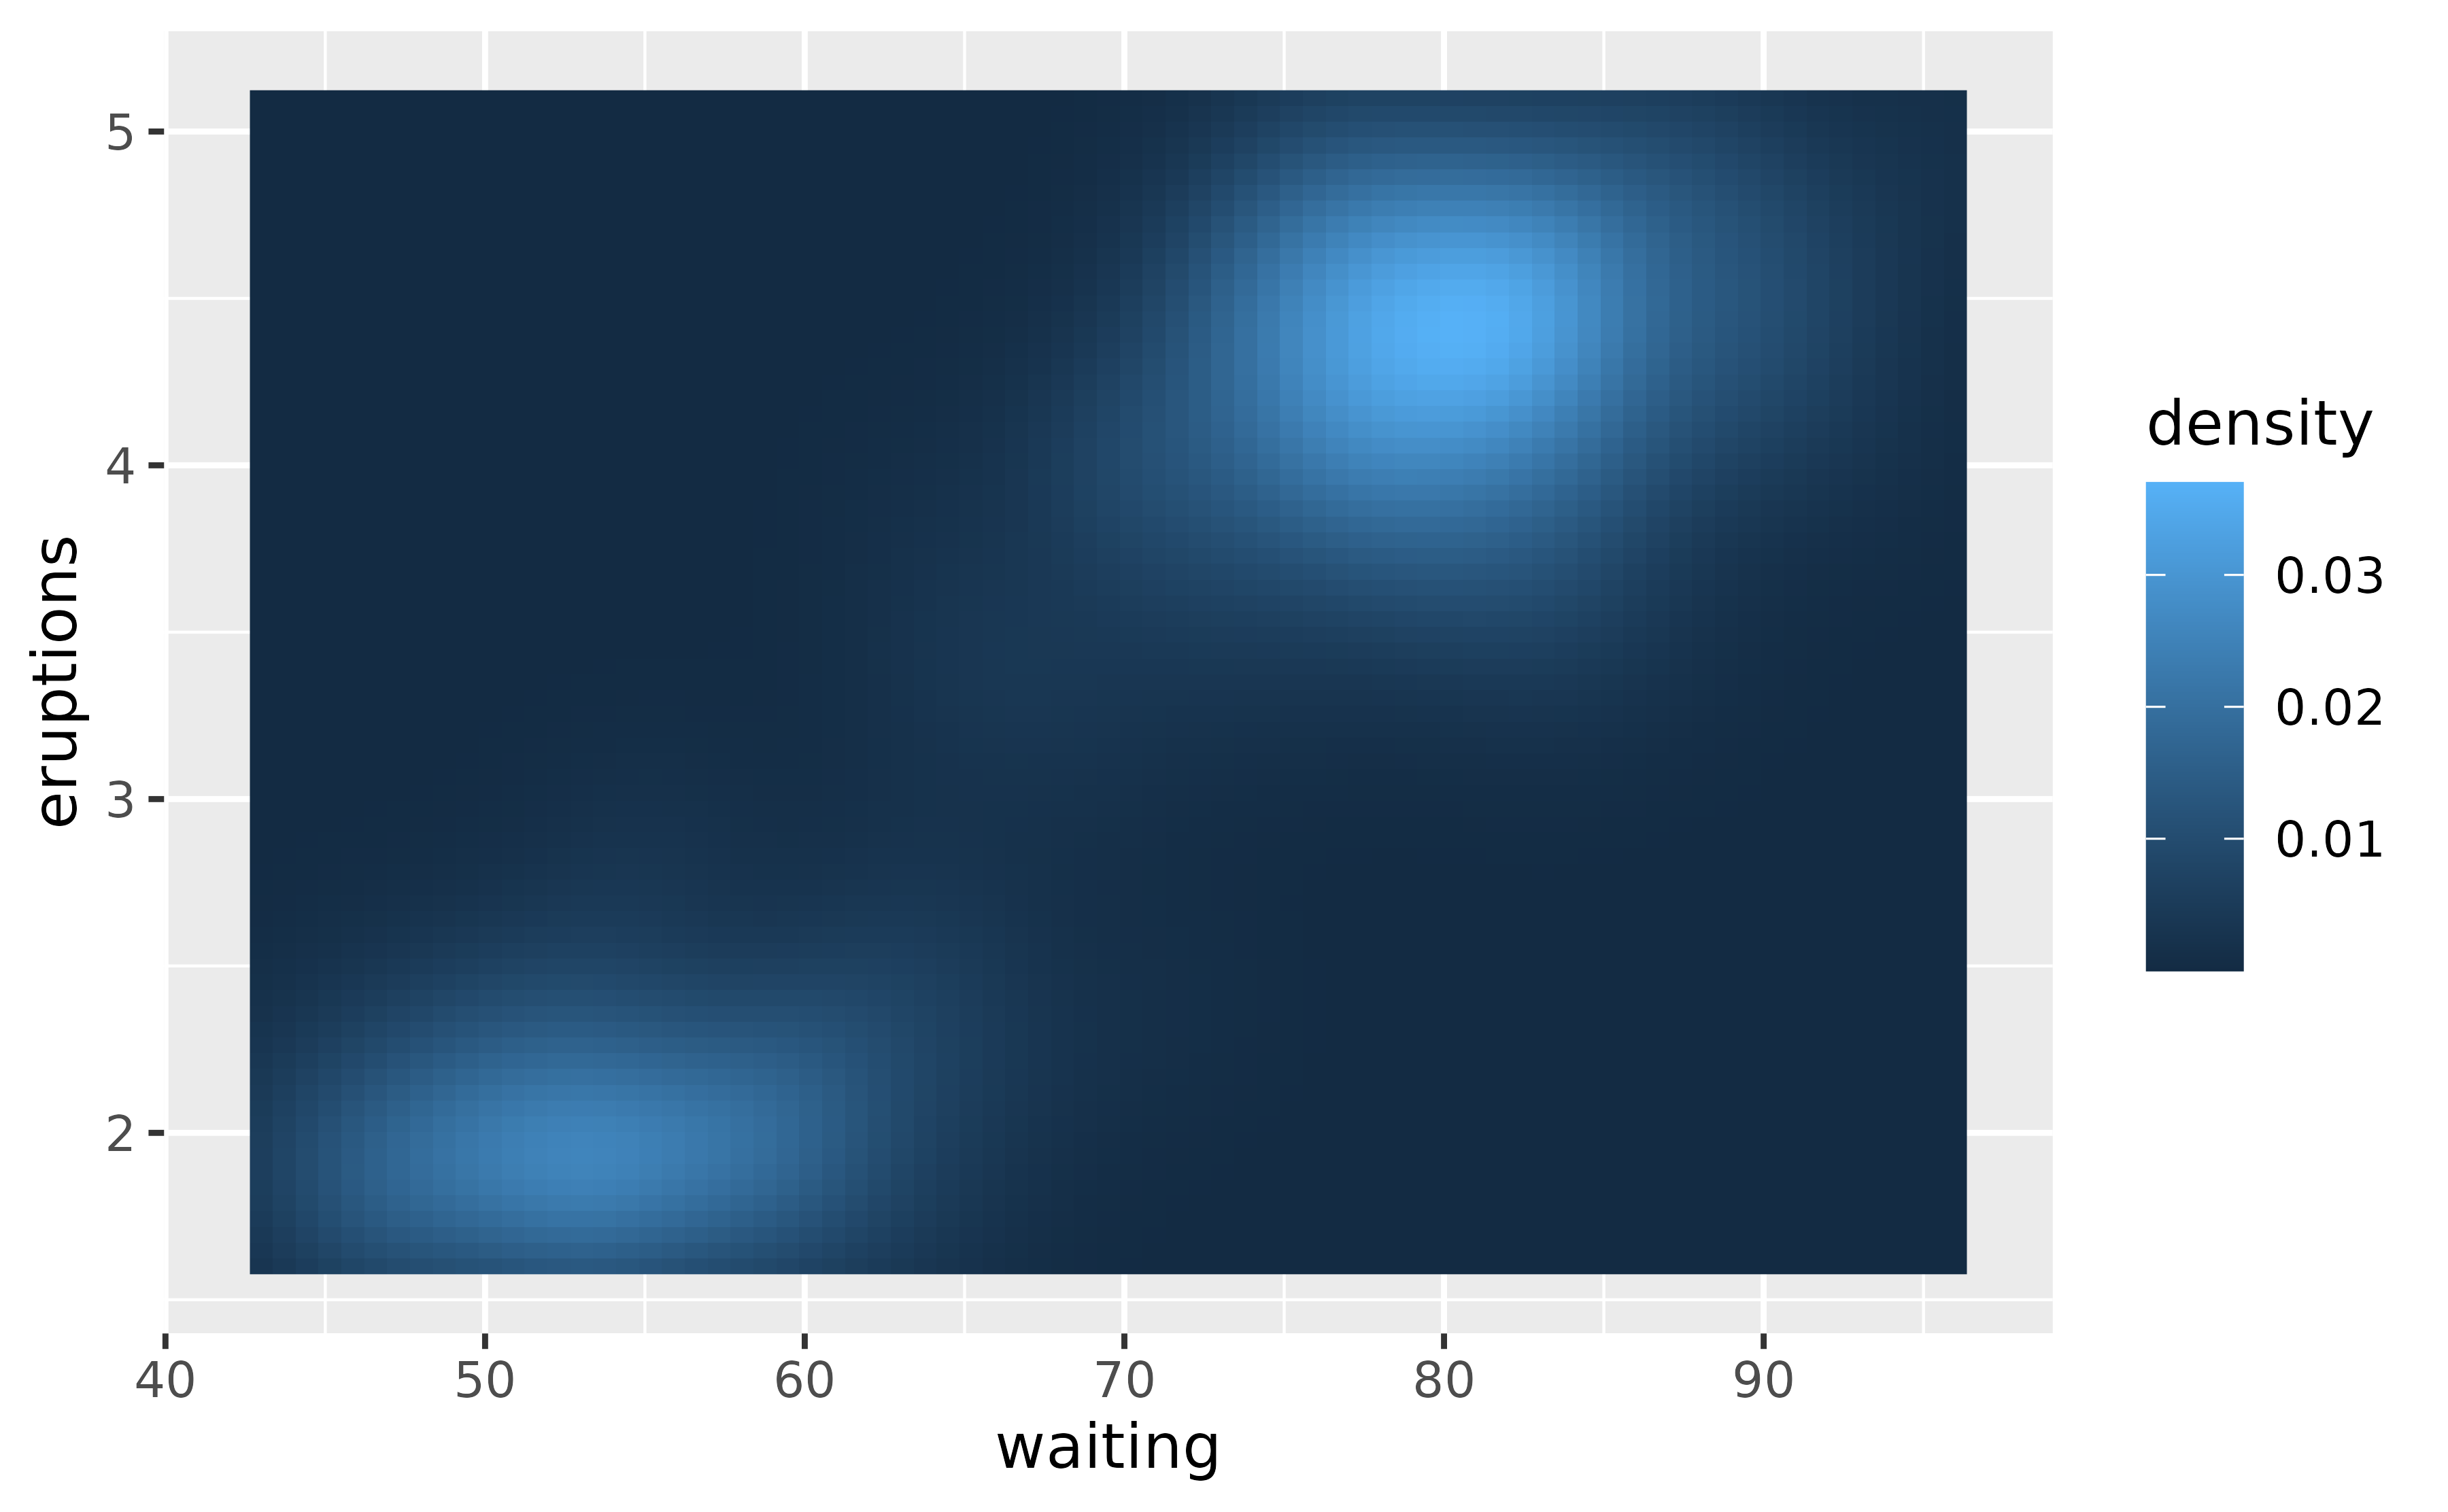 A heatmap showing a 2D density estimate of the waiting and eruption times of the Old Faithful geyser. The heatmap does not touch the panel edges.